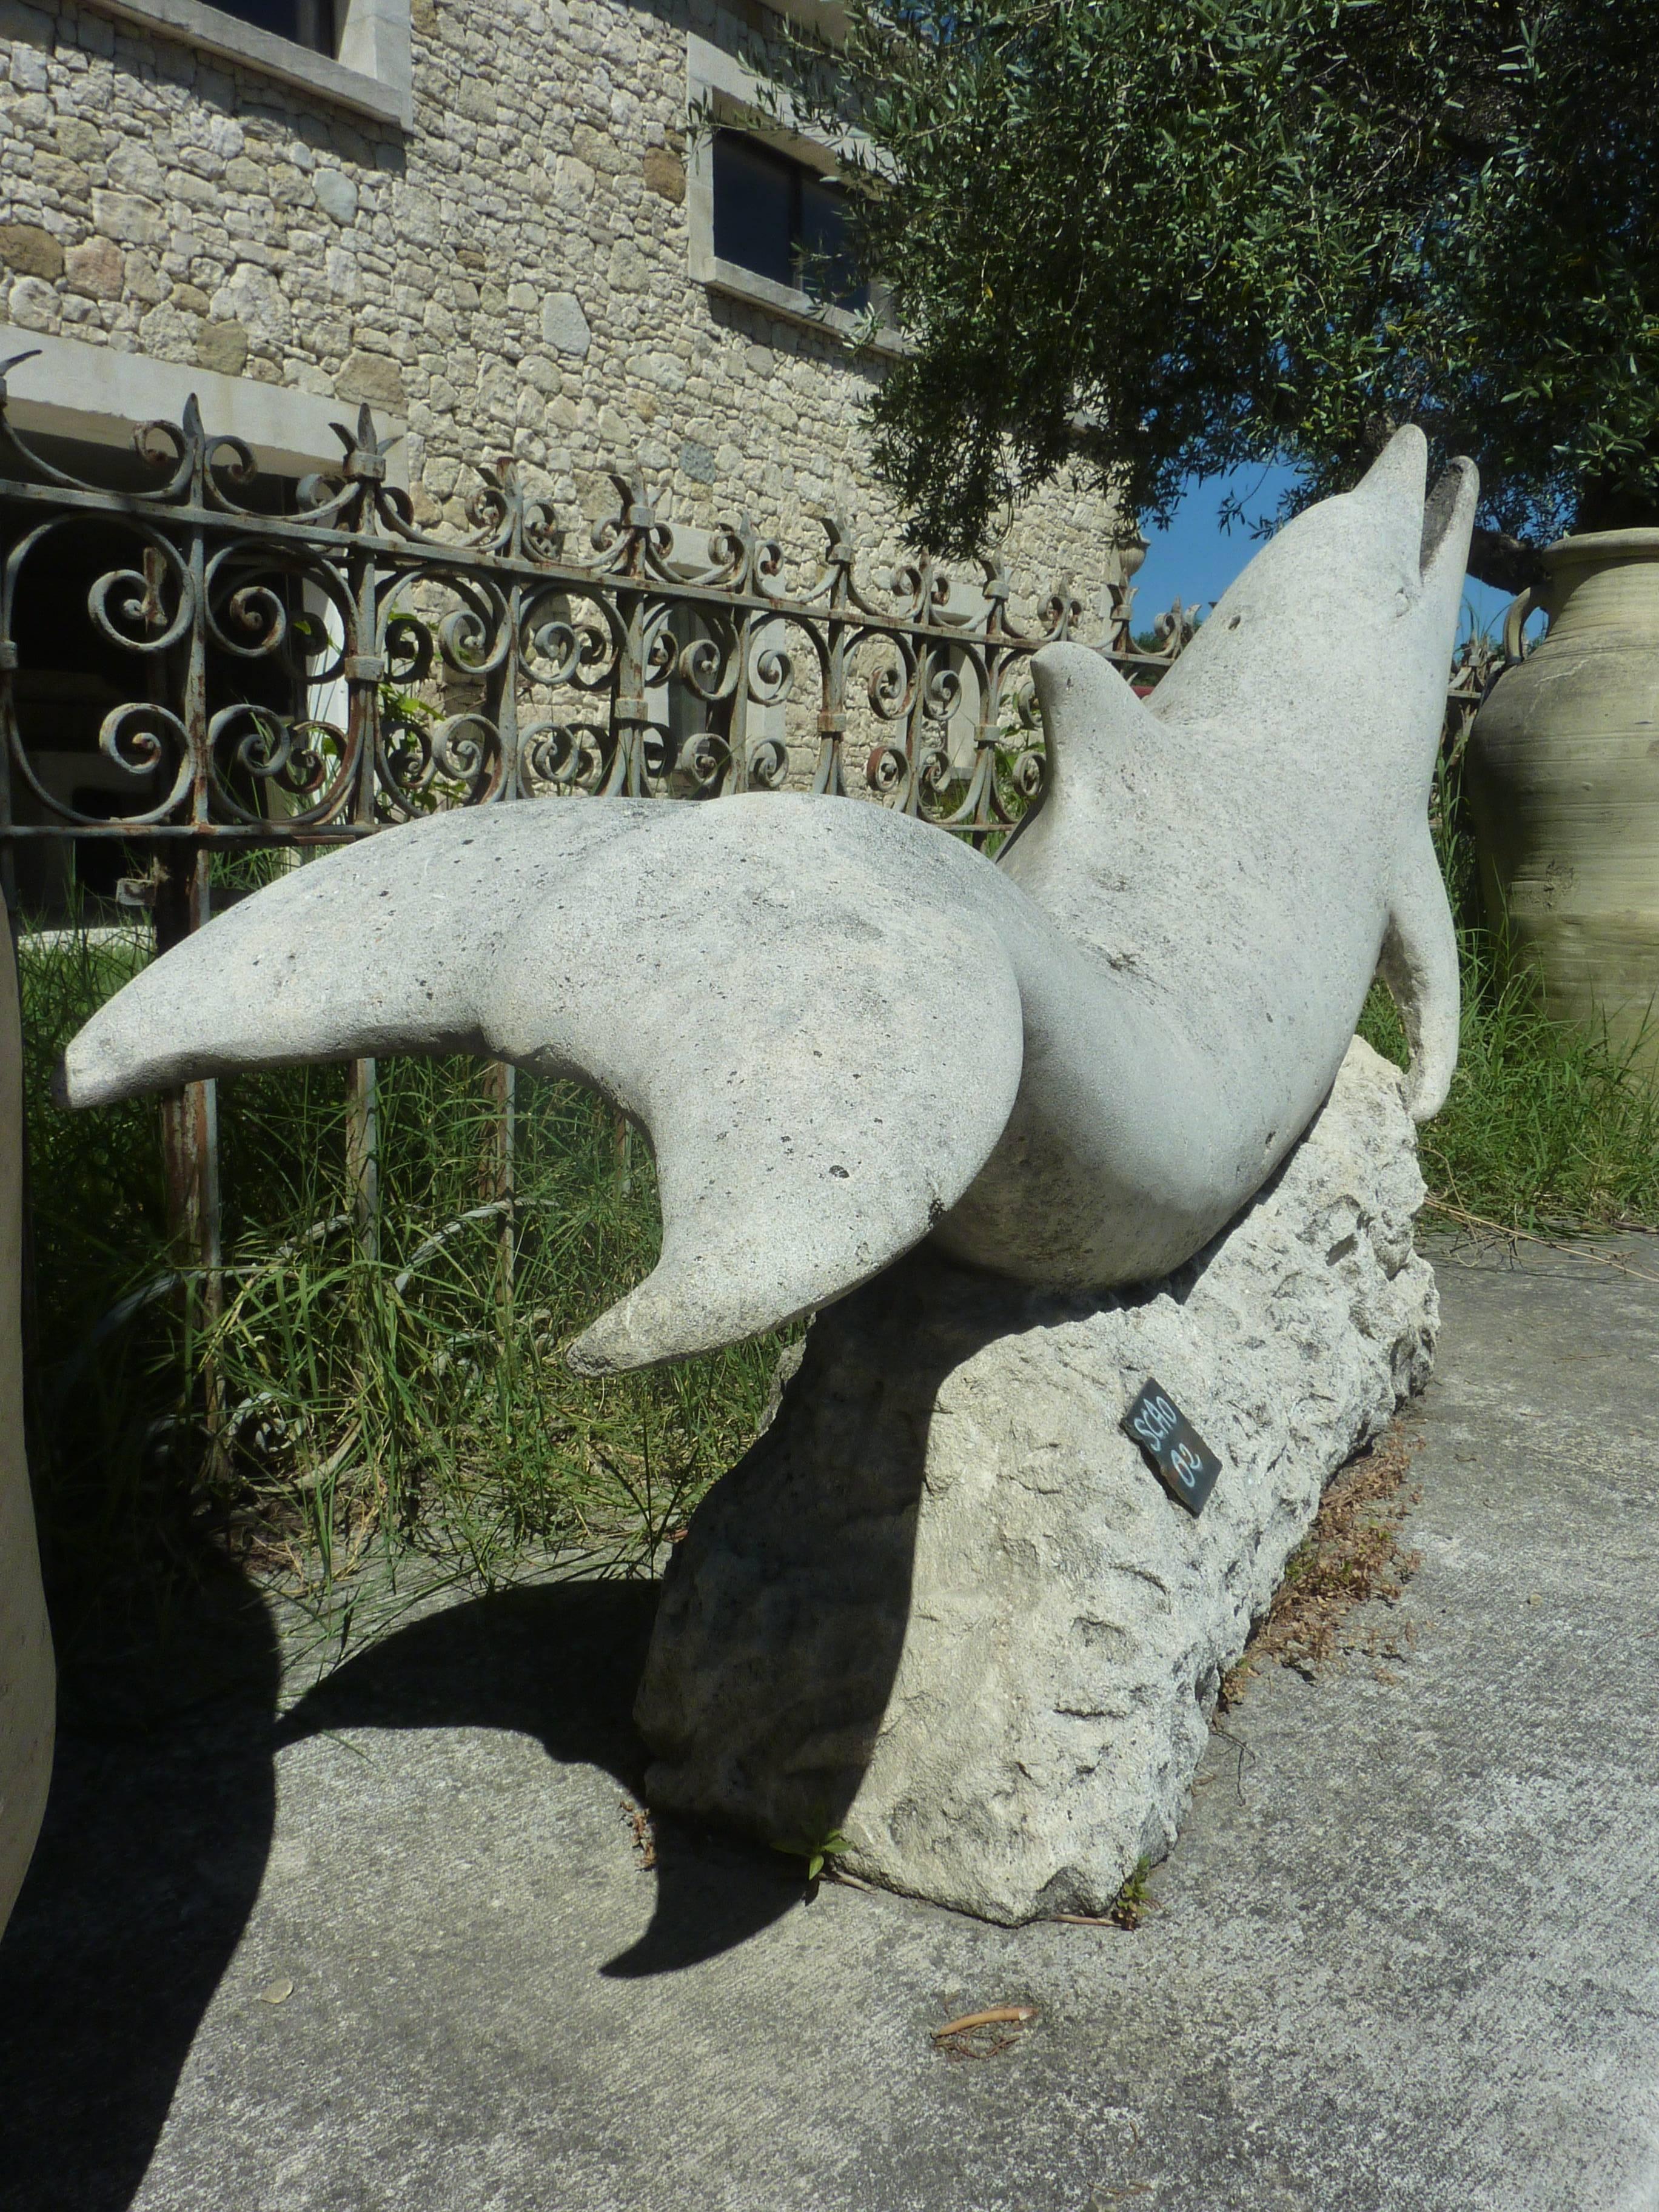 This elegant piece has fine details and a stunning patinated natural finish.

This large dolphin is resting on a solid block of stone. It has been hand-sculpted by a master stone mason into a massive block of monolithic natural French